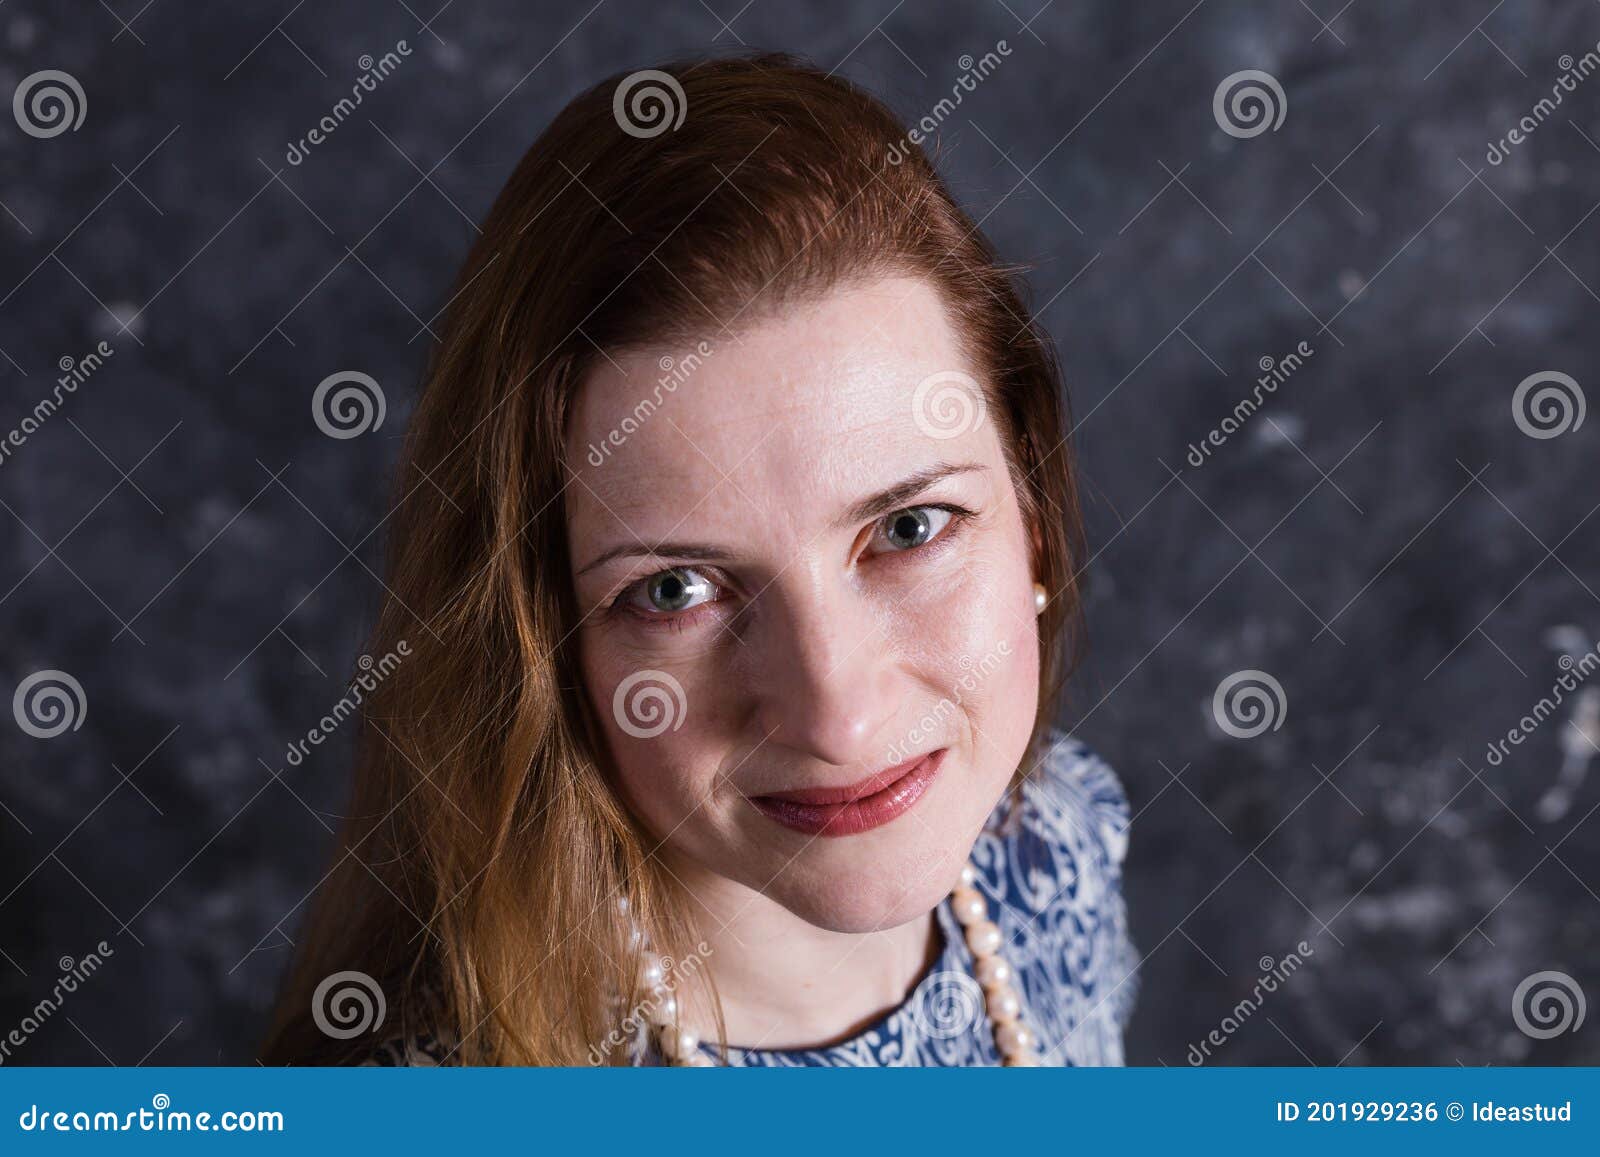 Cheerful Middle Aged Woman In Blue Dress Stock Photo Image Of Elegant